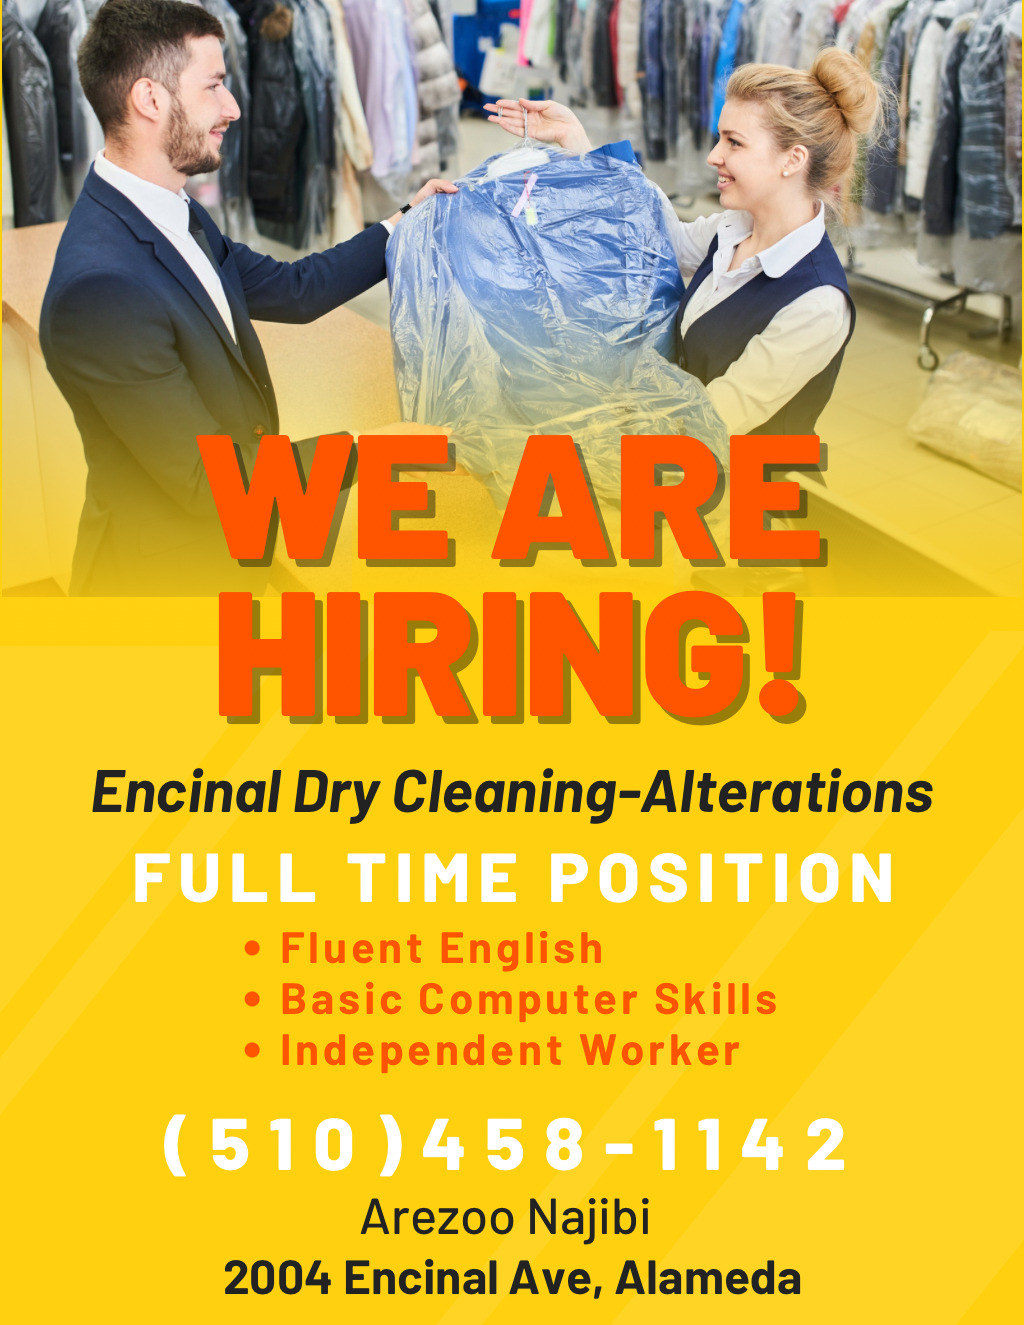 Digifli Community Bulletin Boards HIRING at Encinal Dry Cleaning Alterations for a Full Time Position  promotion flier on Digifli com